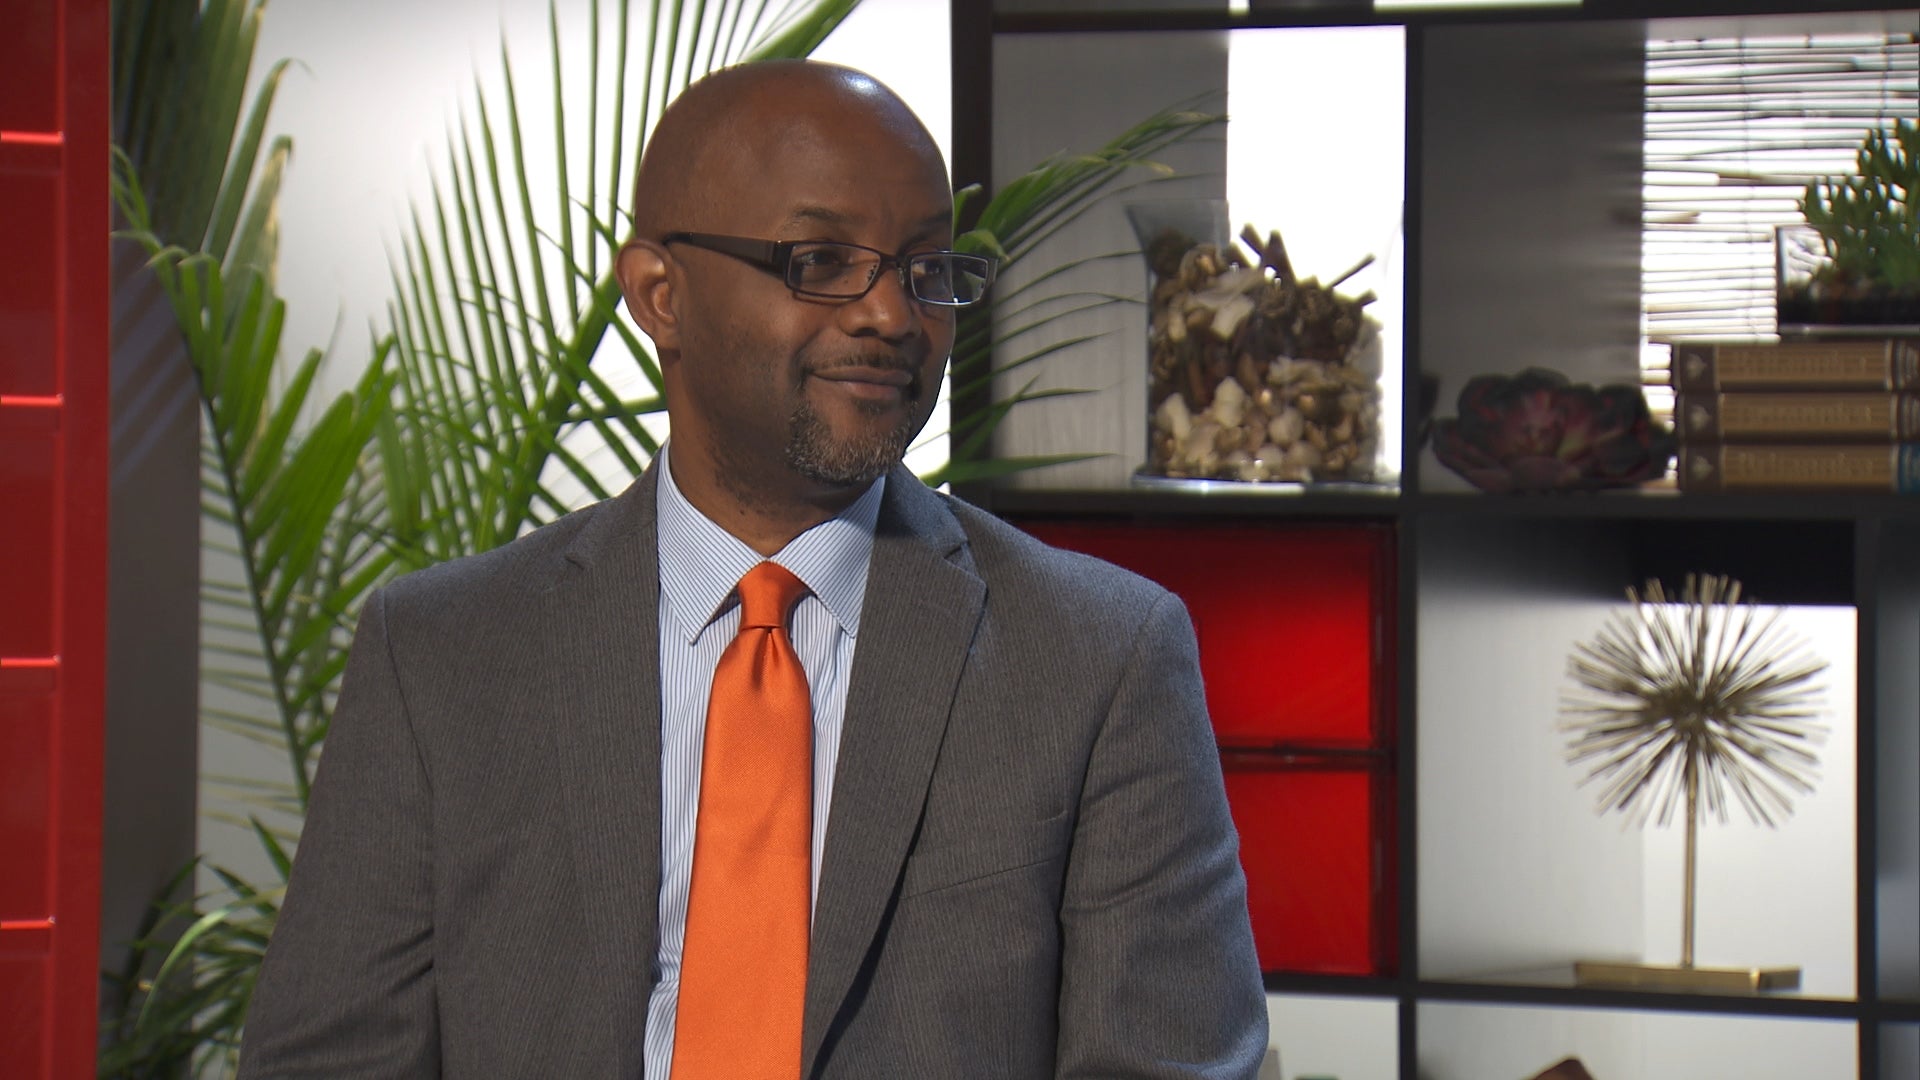 Pastor Cal, wearing a gray suit and orange tie, in an episode of 'Married at First Sight' 